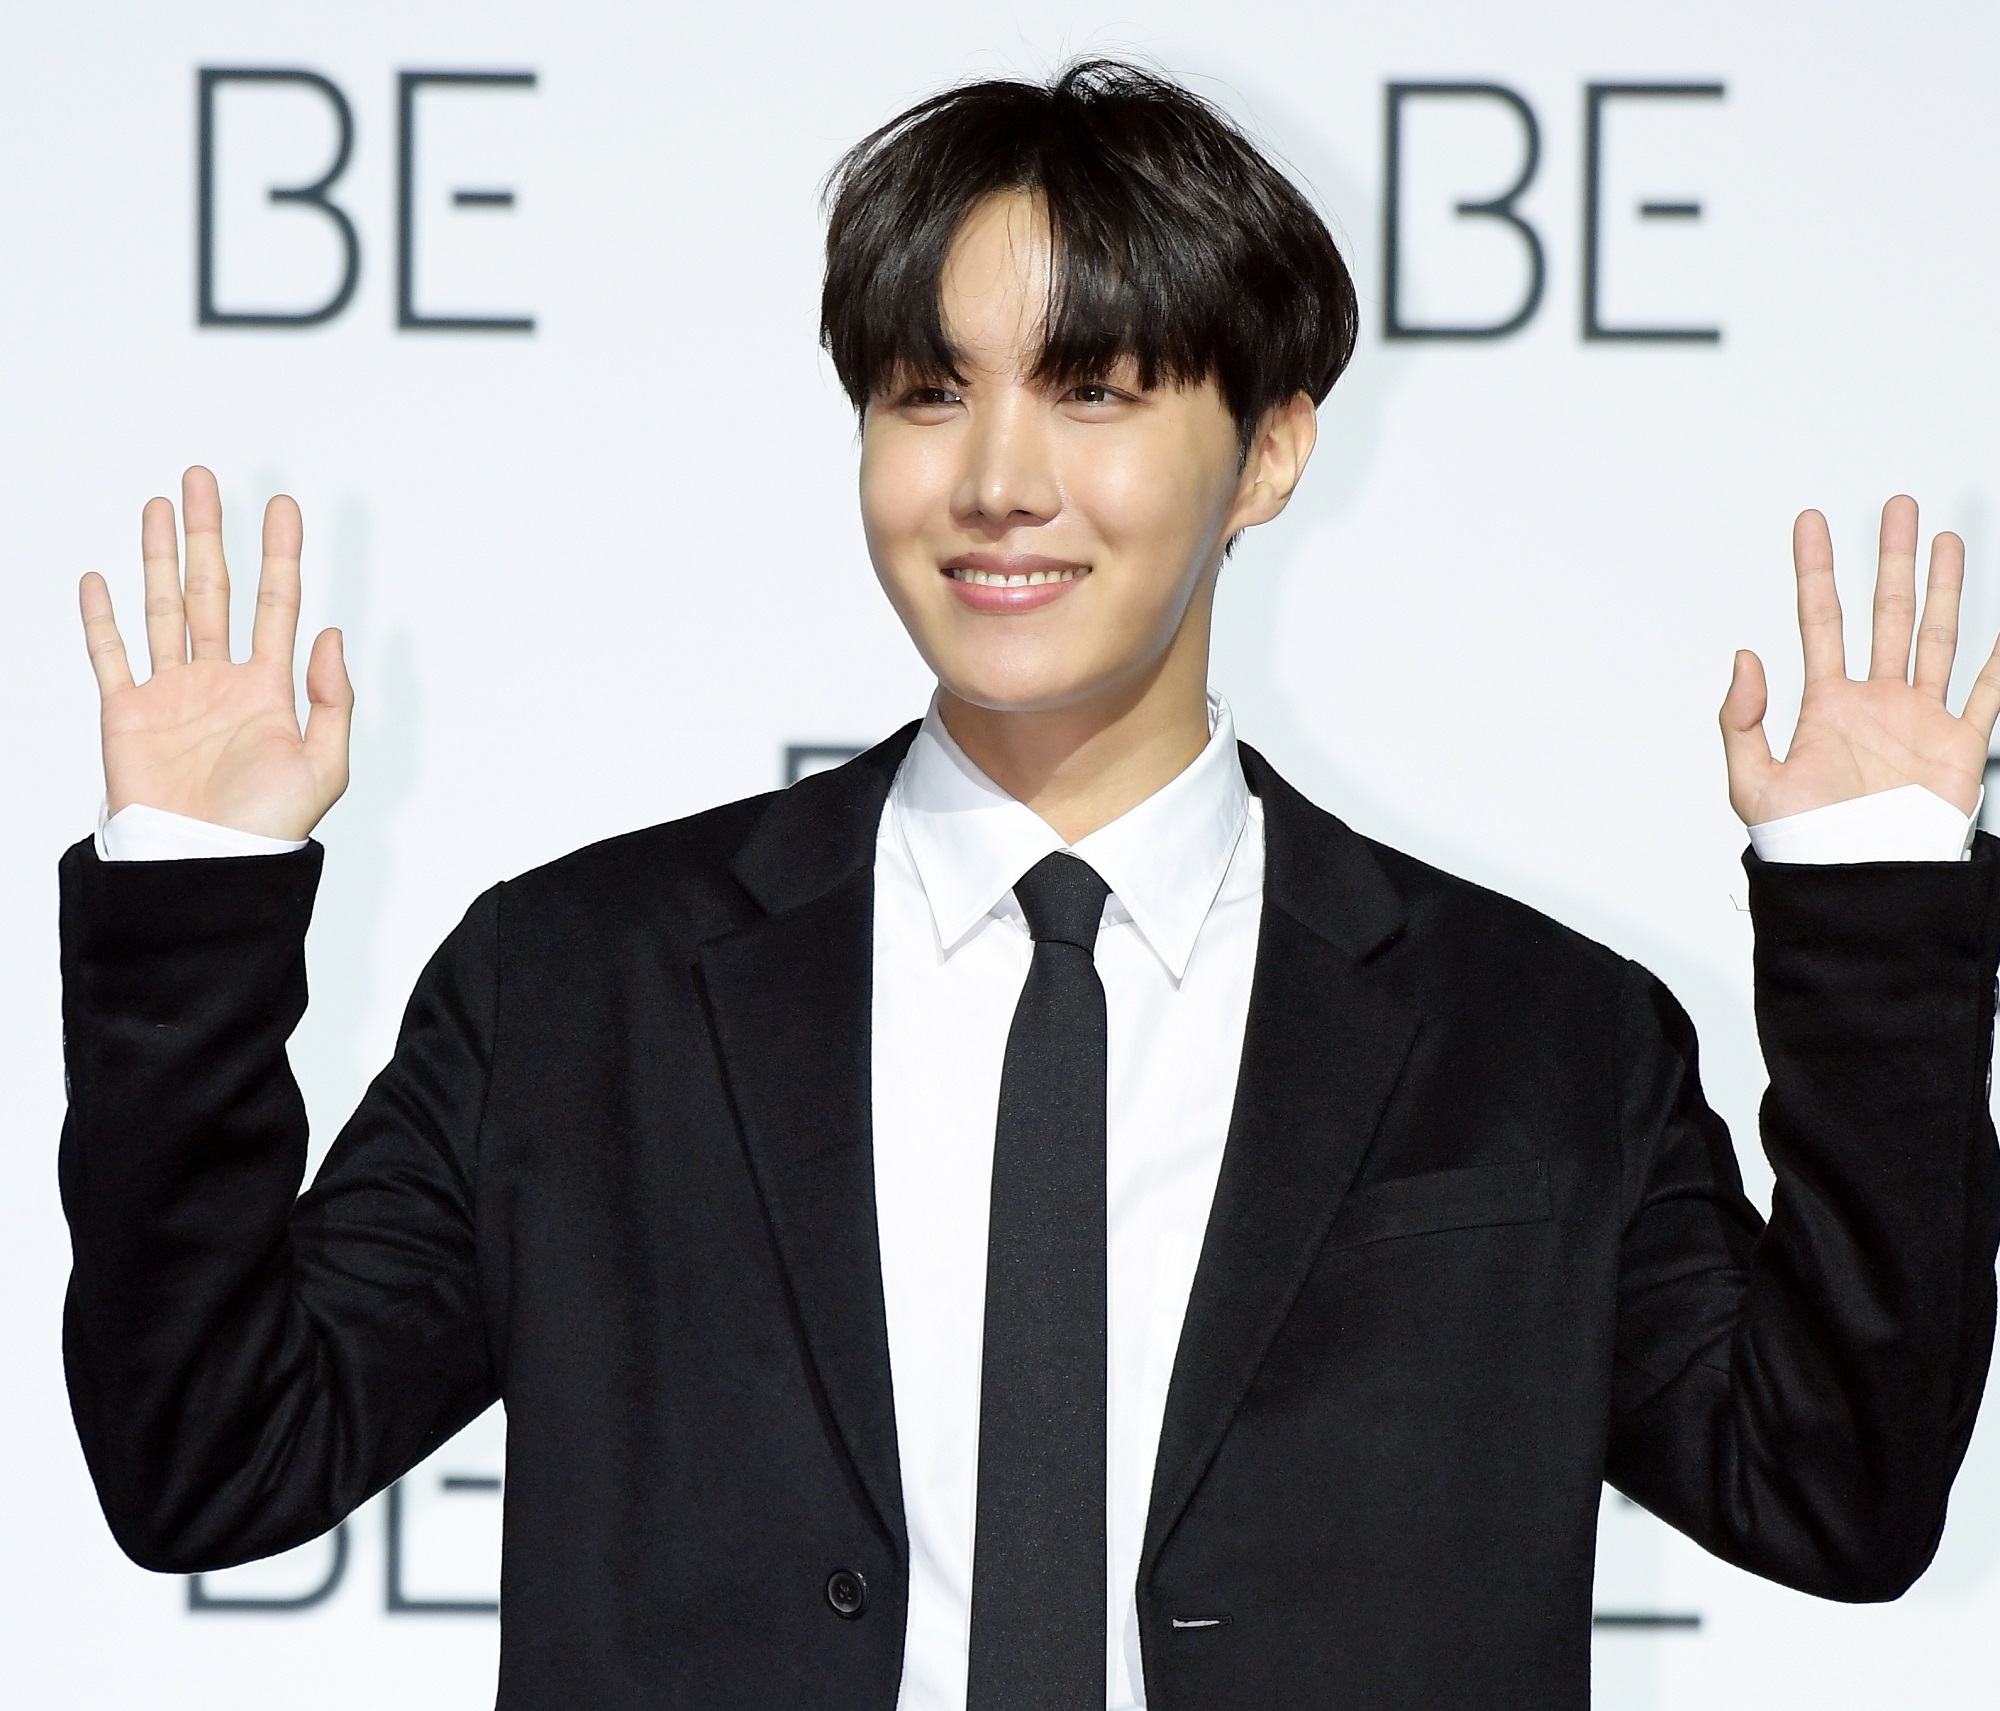 J-Hope of BTS raises his hands during BTS' press conference for their album 'BE'